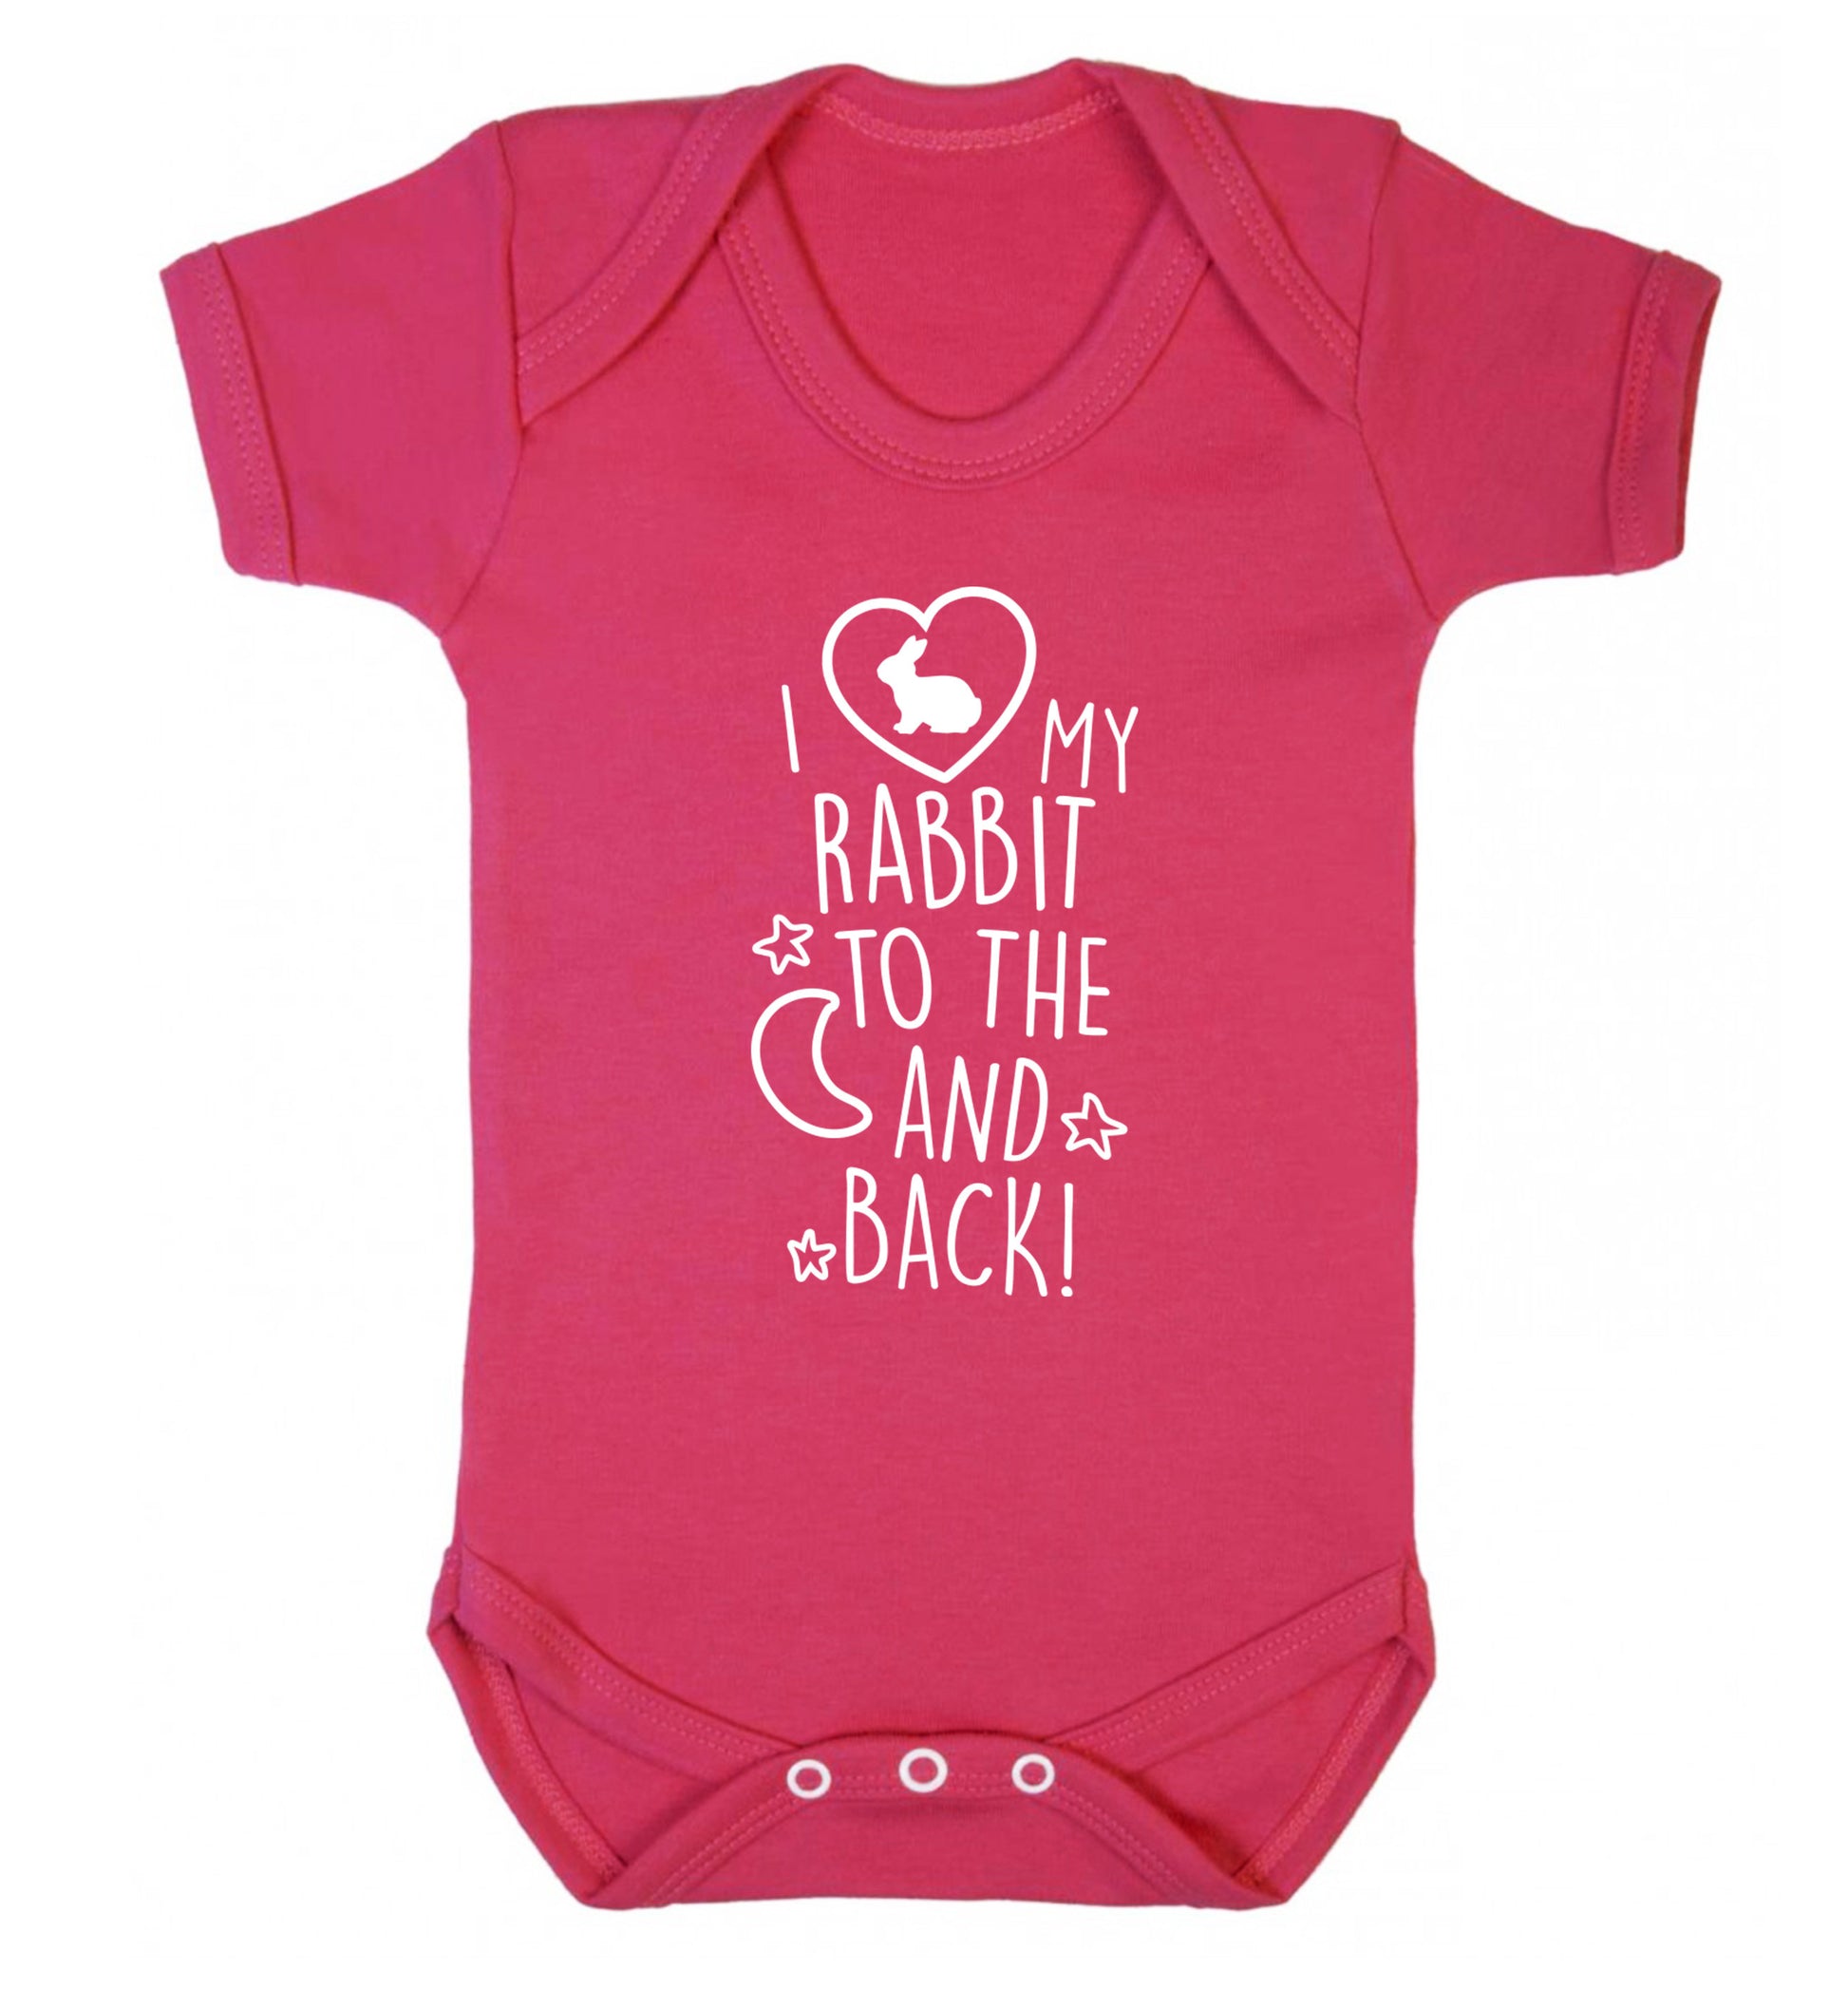 I love my rabbit to the moon and back Baby Vest dark pink 18-24 months